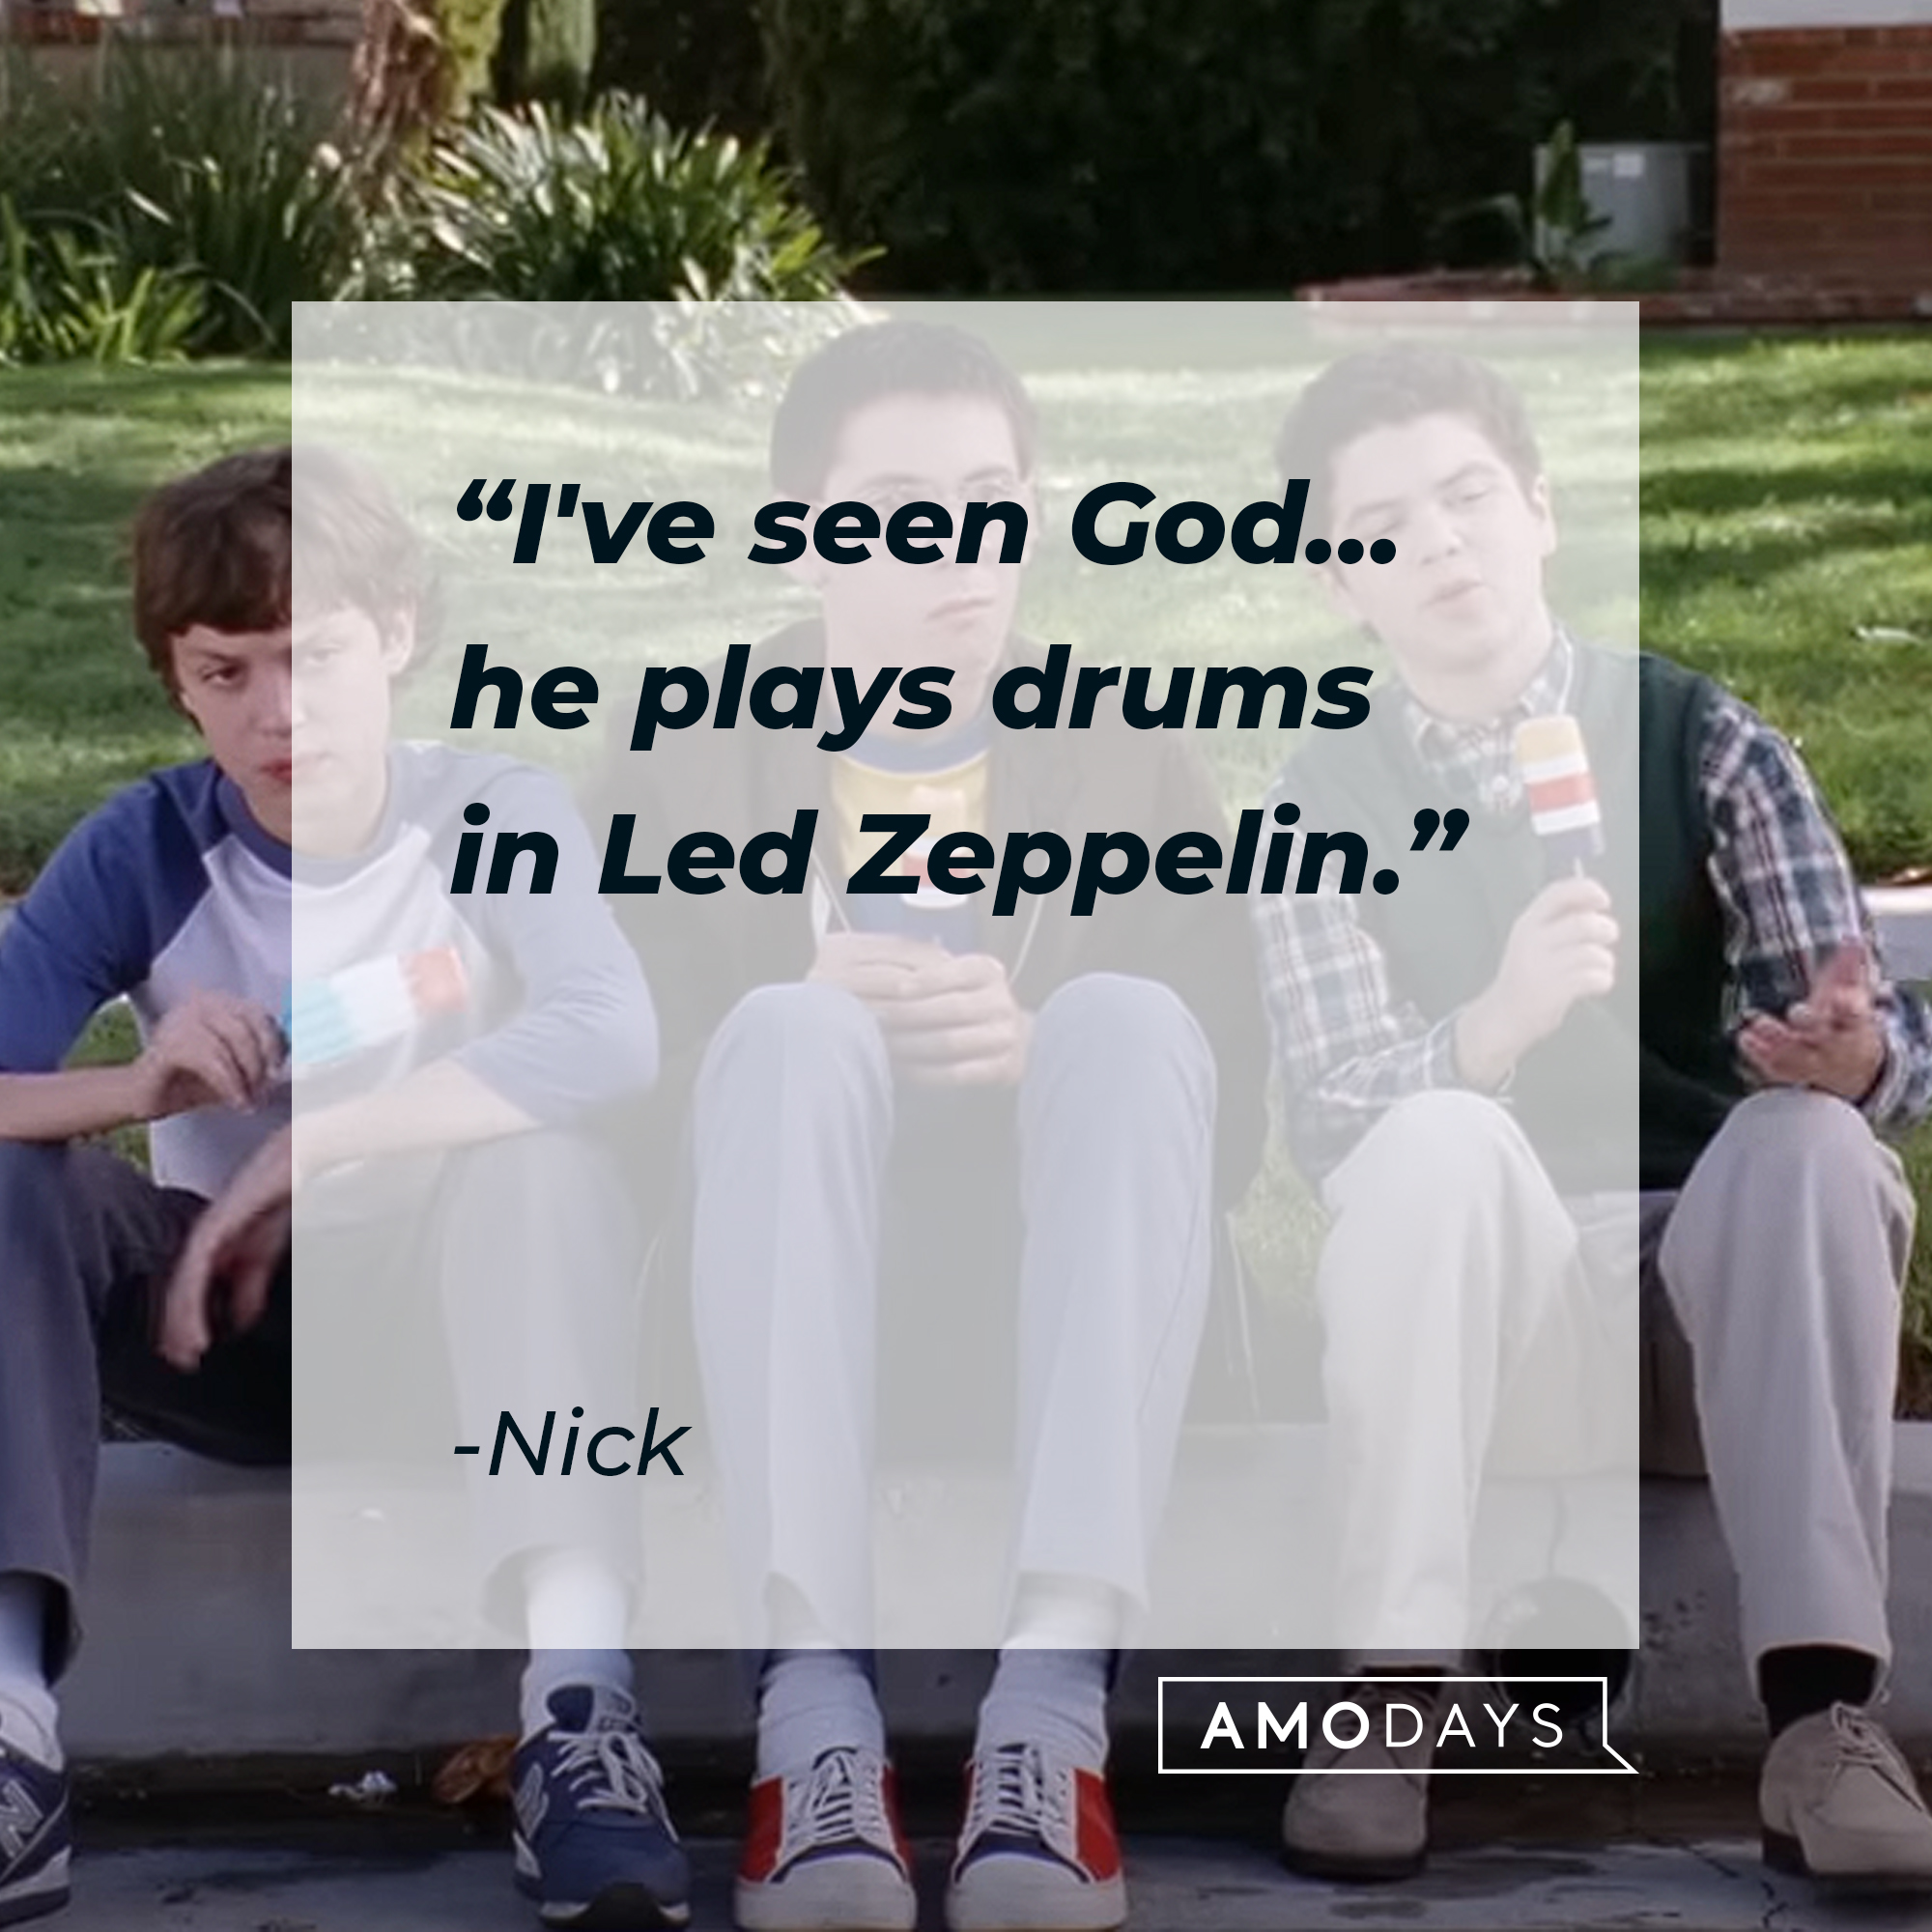 Nick's quote: "I've seen God… he plays drums in Led Zeppelin." | Source: Youtube.com/paramountmovies